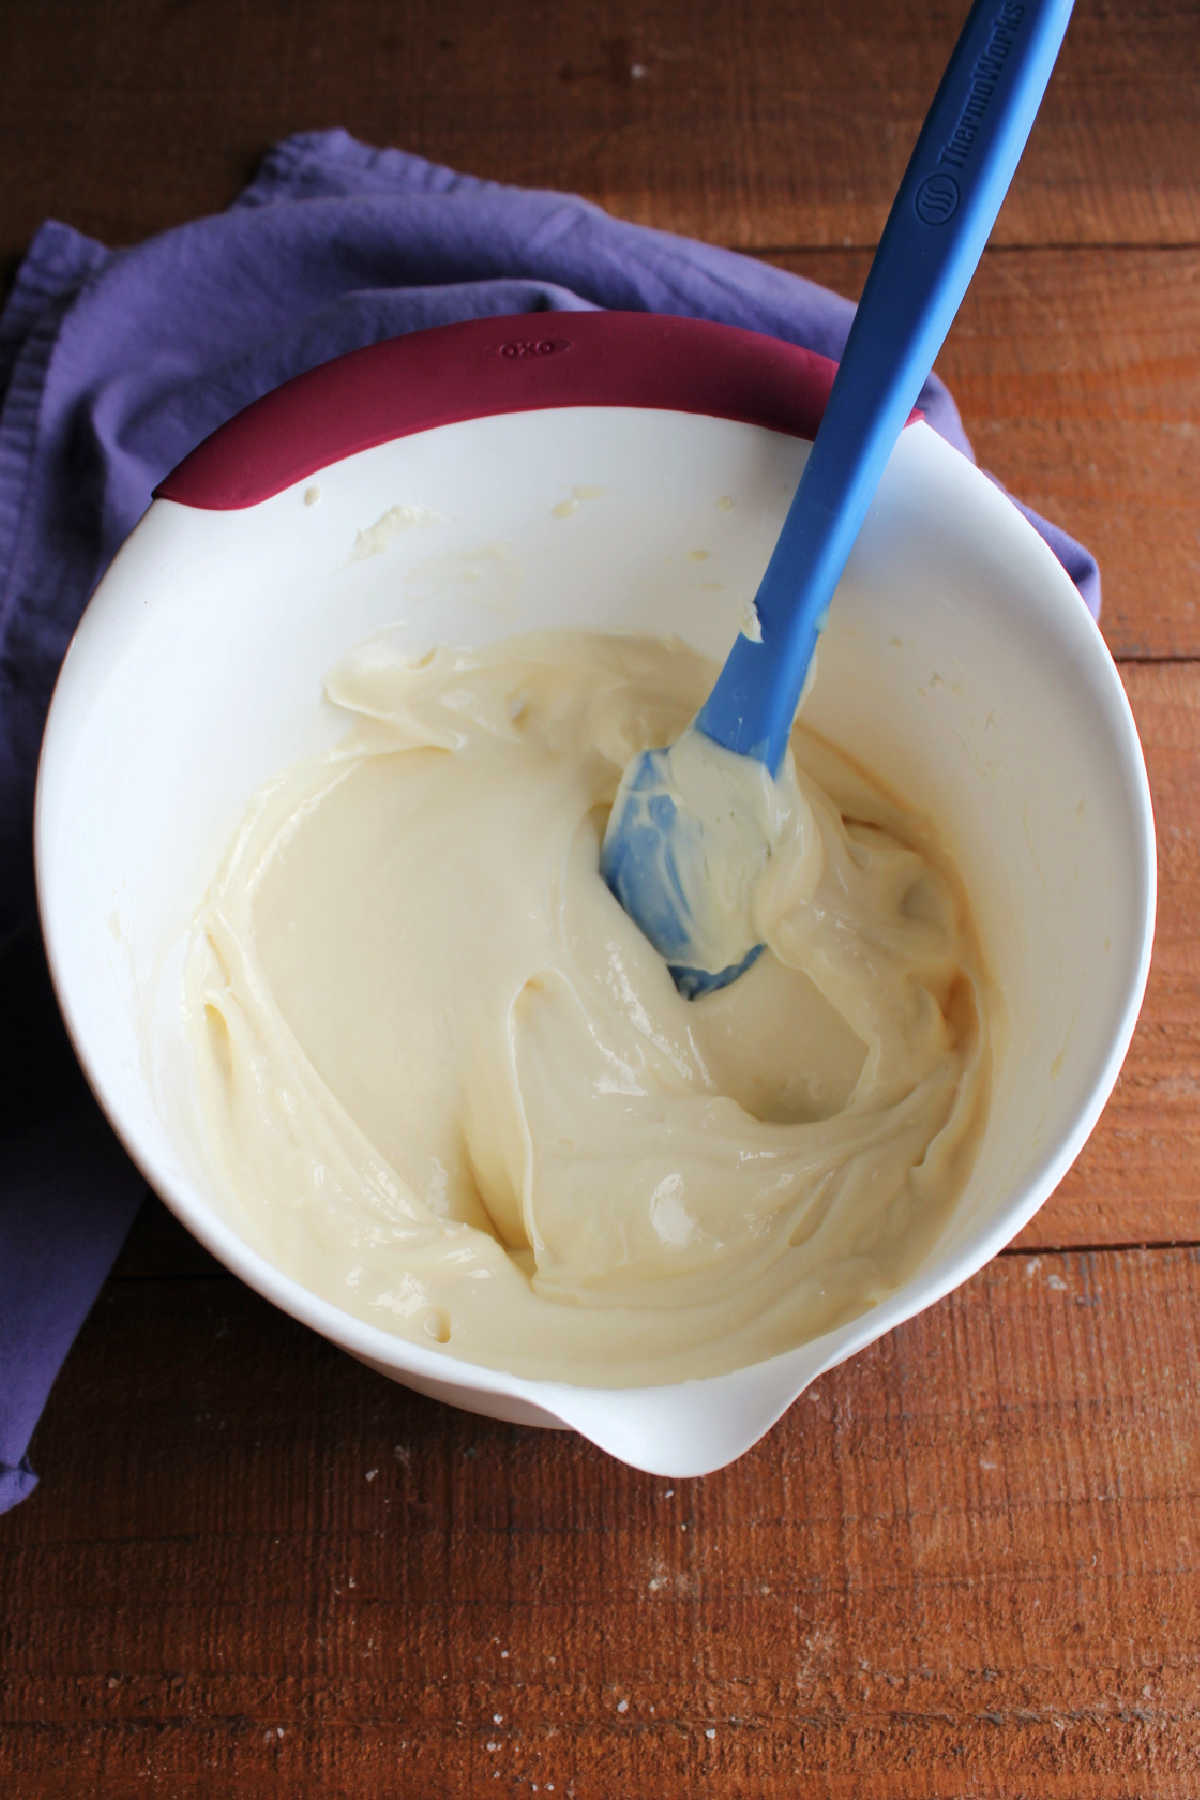 Mixing bowl of chilled lemon cream cheese frosting showing how it is thicker and now holds its ridges when a spatula is run over it.